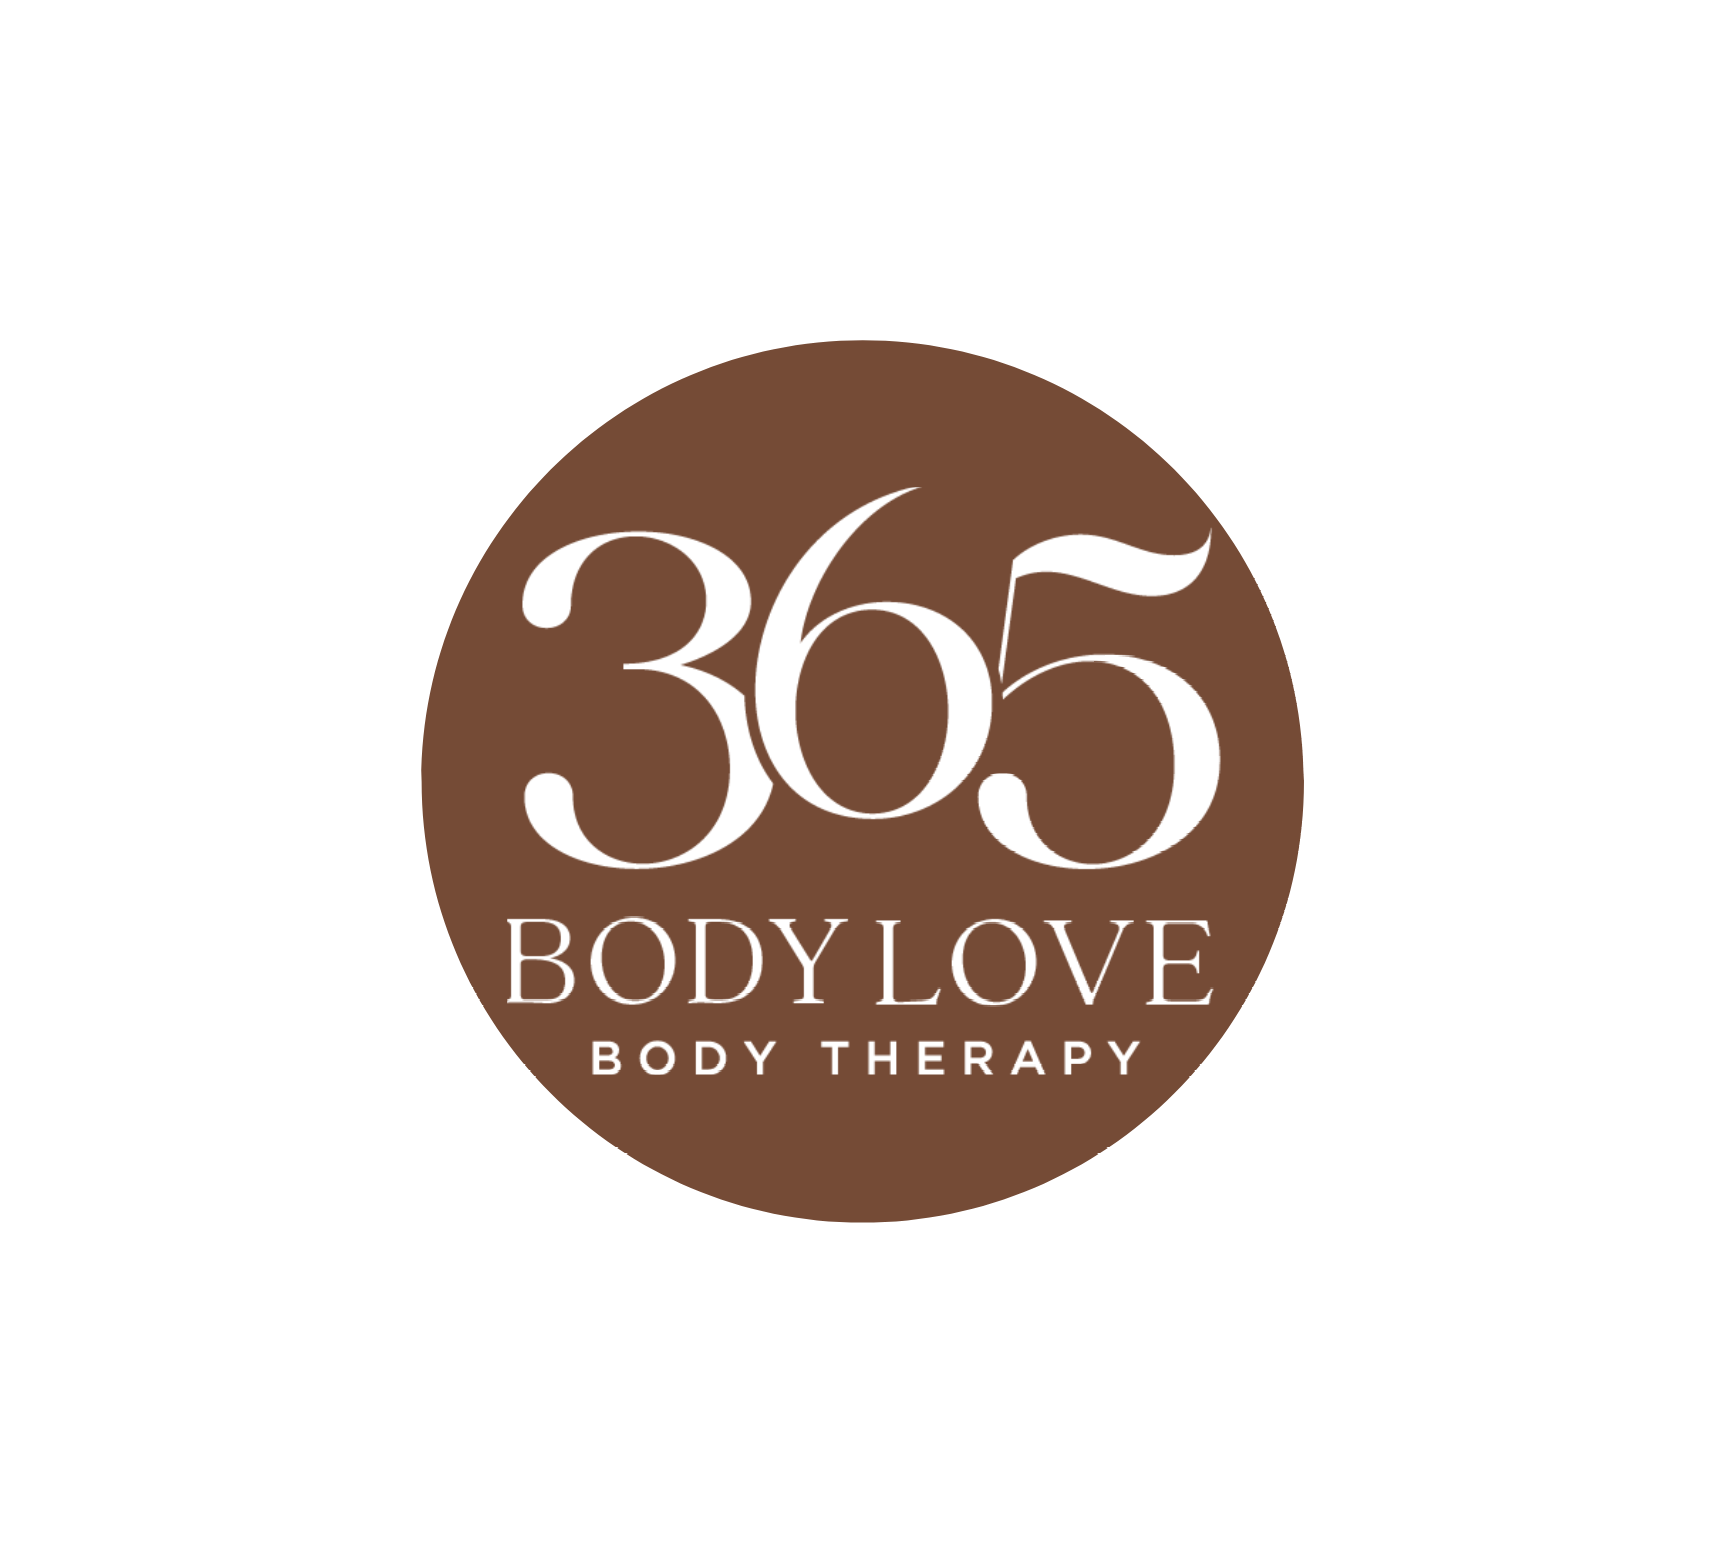 Body & Home Therapy - 365 Body Love